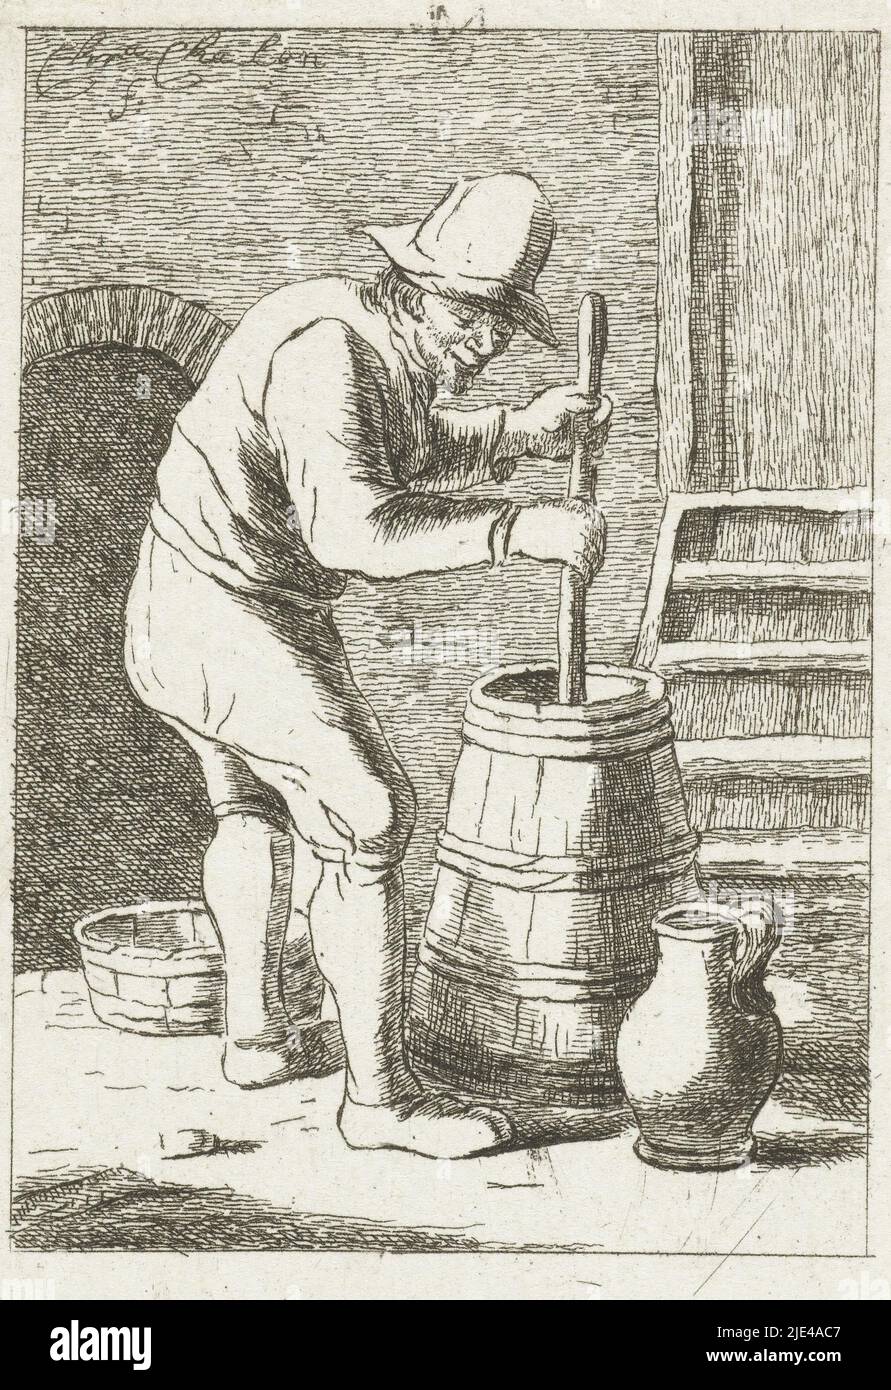 Churning man, Pieter de Mare, after Christina Chalon, 1777 - 1779, A farmer stands next to a churn and churns the milk. A milk jug stands next to the barrel., print maker: Pieter de Mare, intermediary draughtsman: Christina Chalon, (mentioned on object), Leiden, 1777 - 1779, paper, etching, w 70 mm × h 99 mm Stock Photo